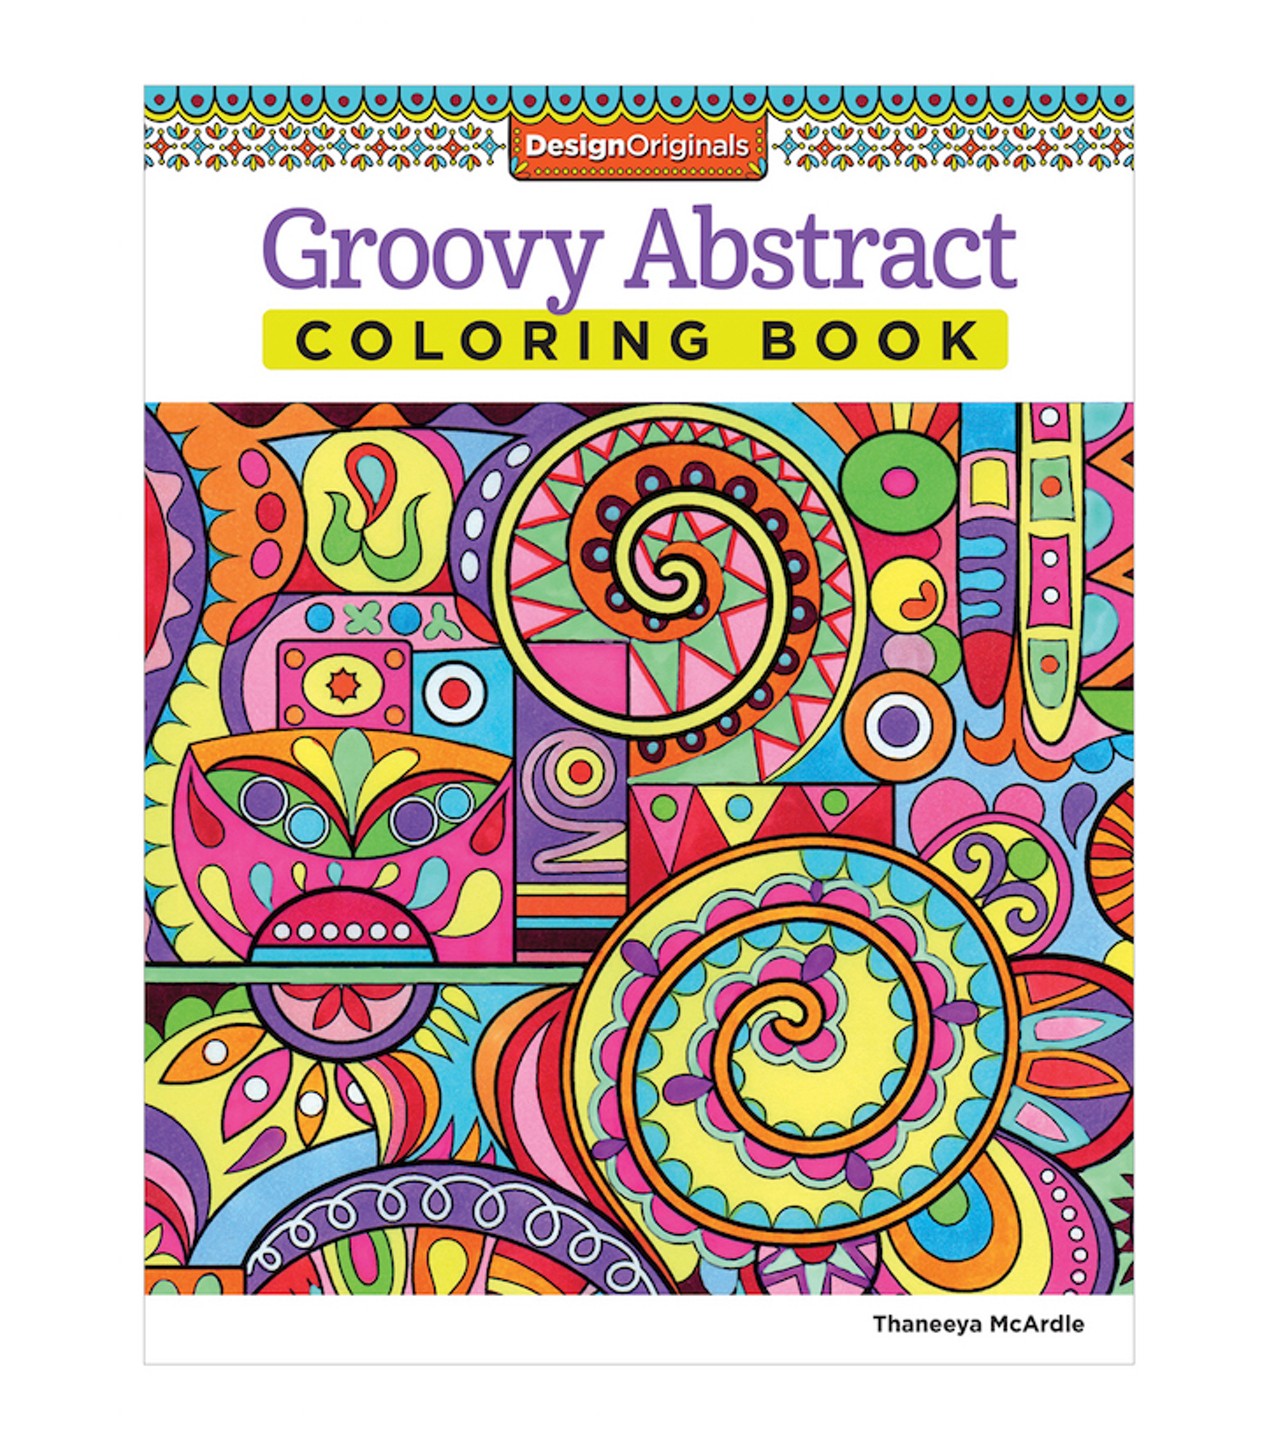  Groovy Abstract Coloring Book
Go on a groovy adventure, man. 
Buy it at 123stitch.com 